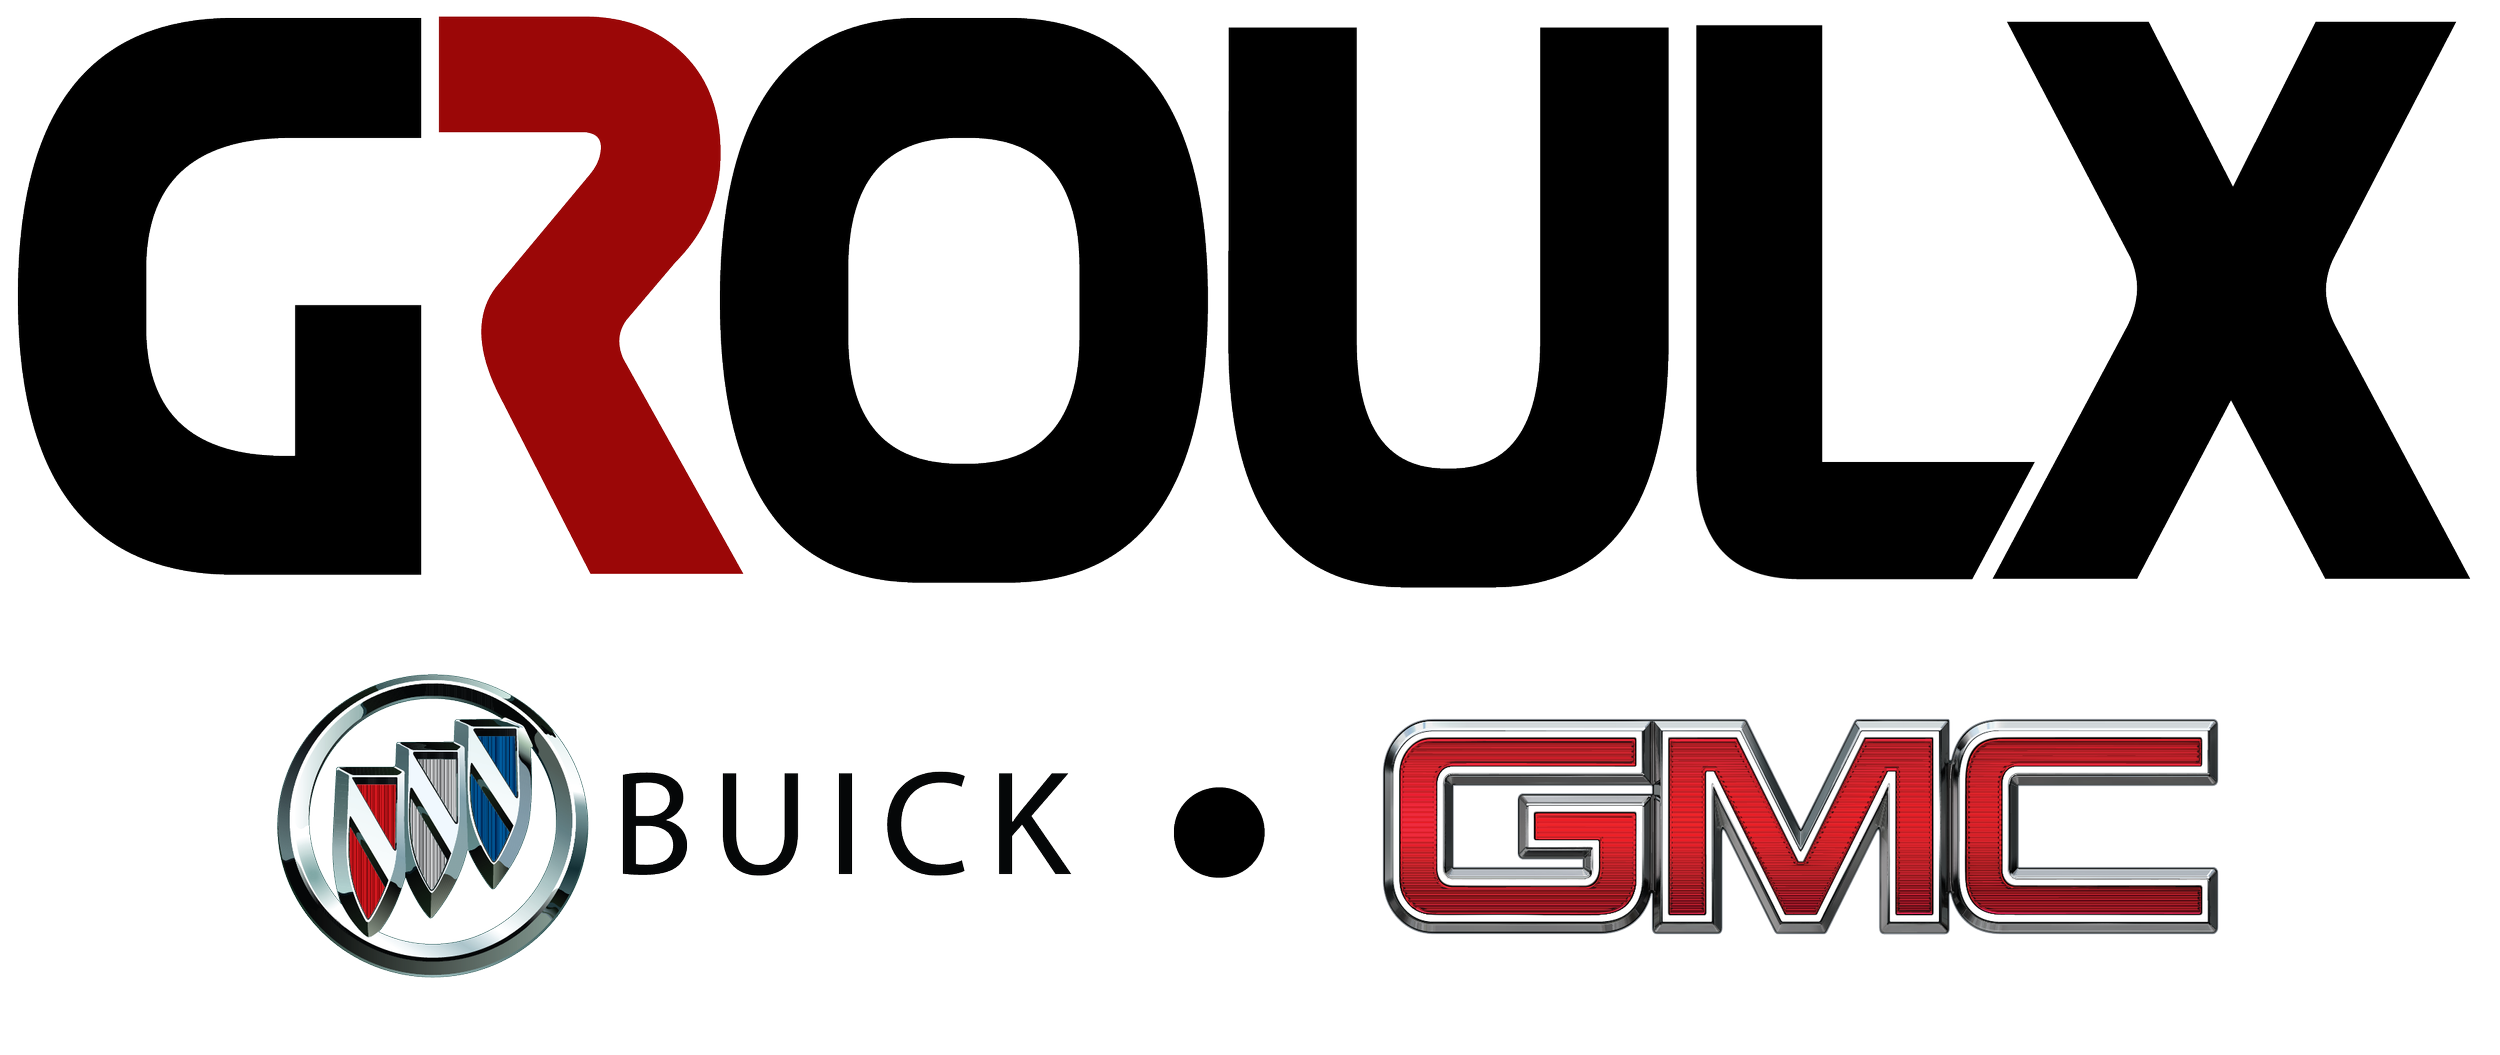 Groulx Buick GMC.png